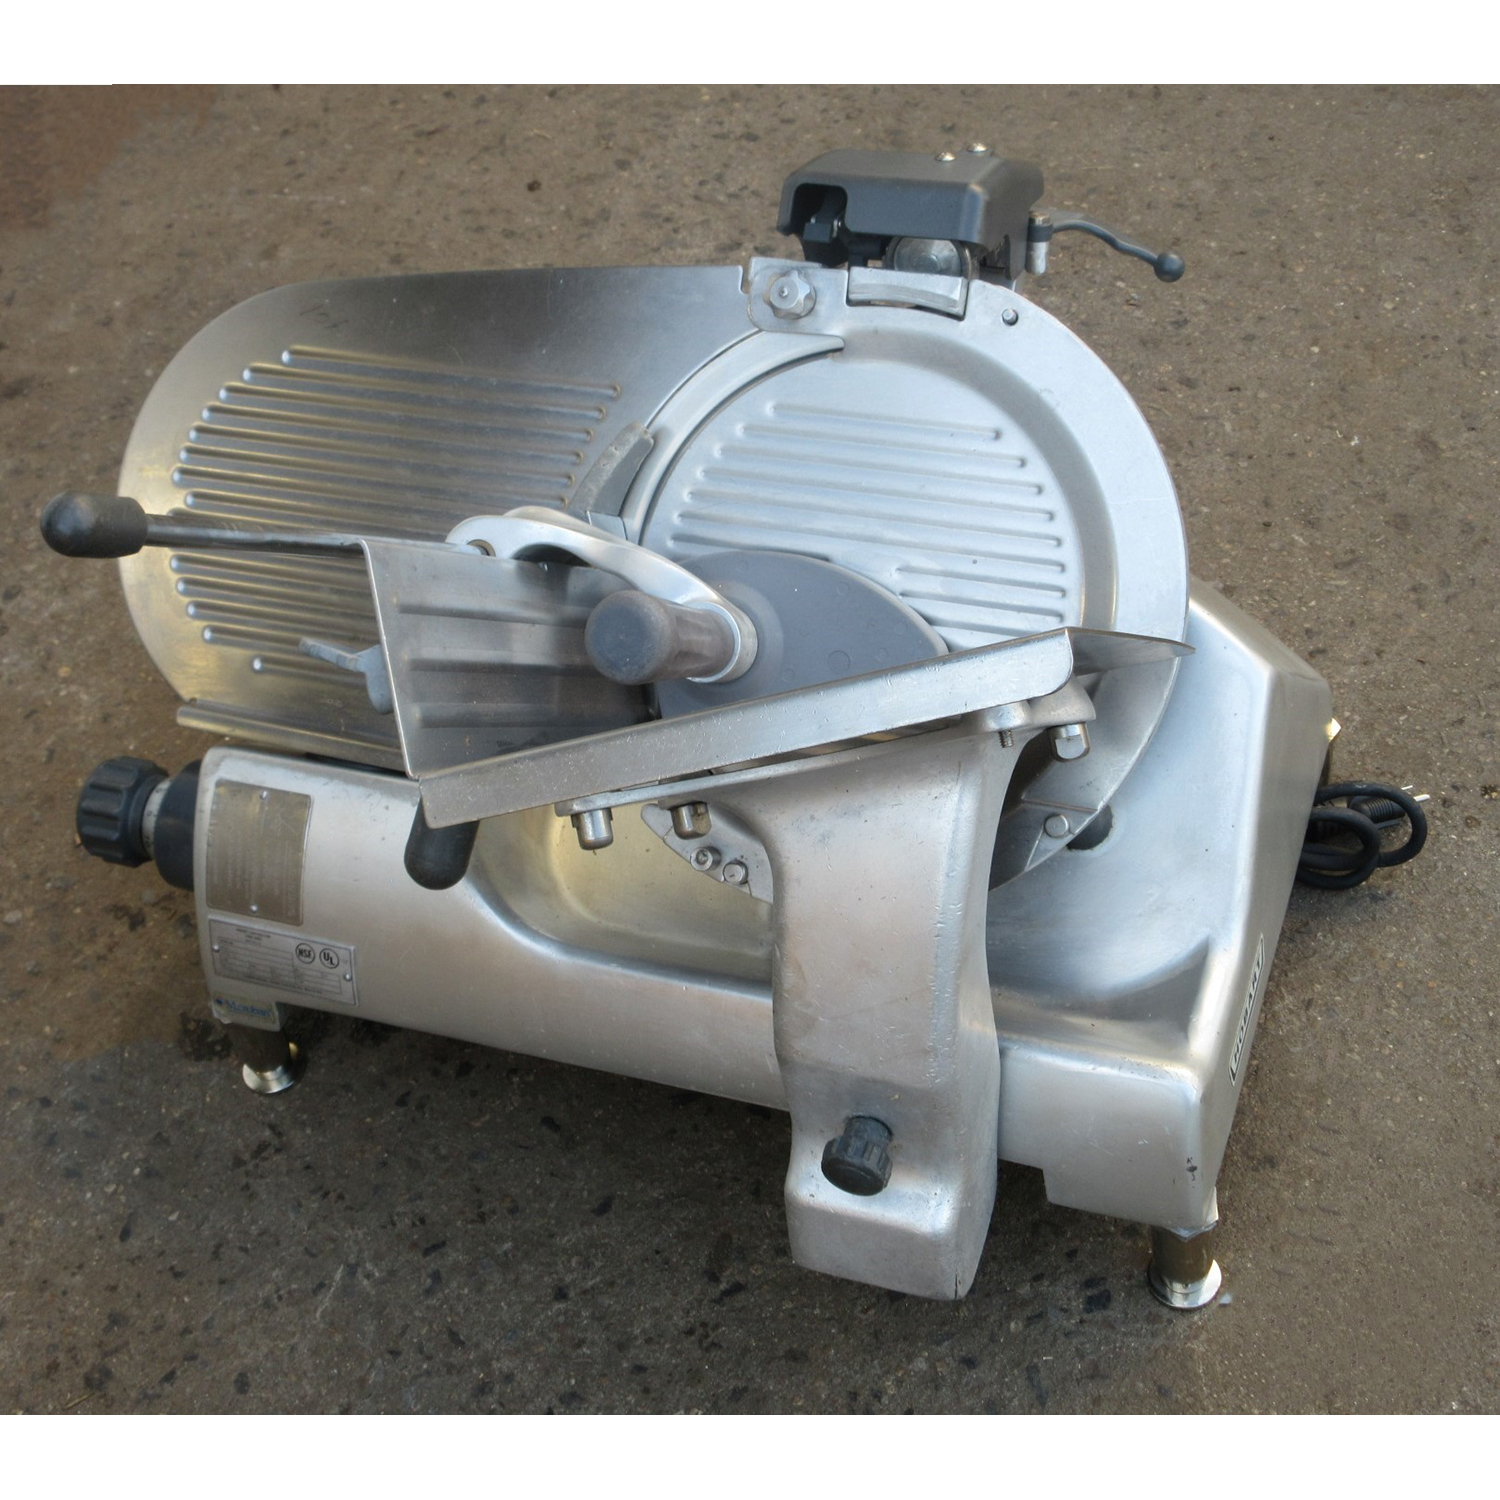 Hobart 2912 Meat Slicer, Used Excellent Condition image 1